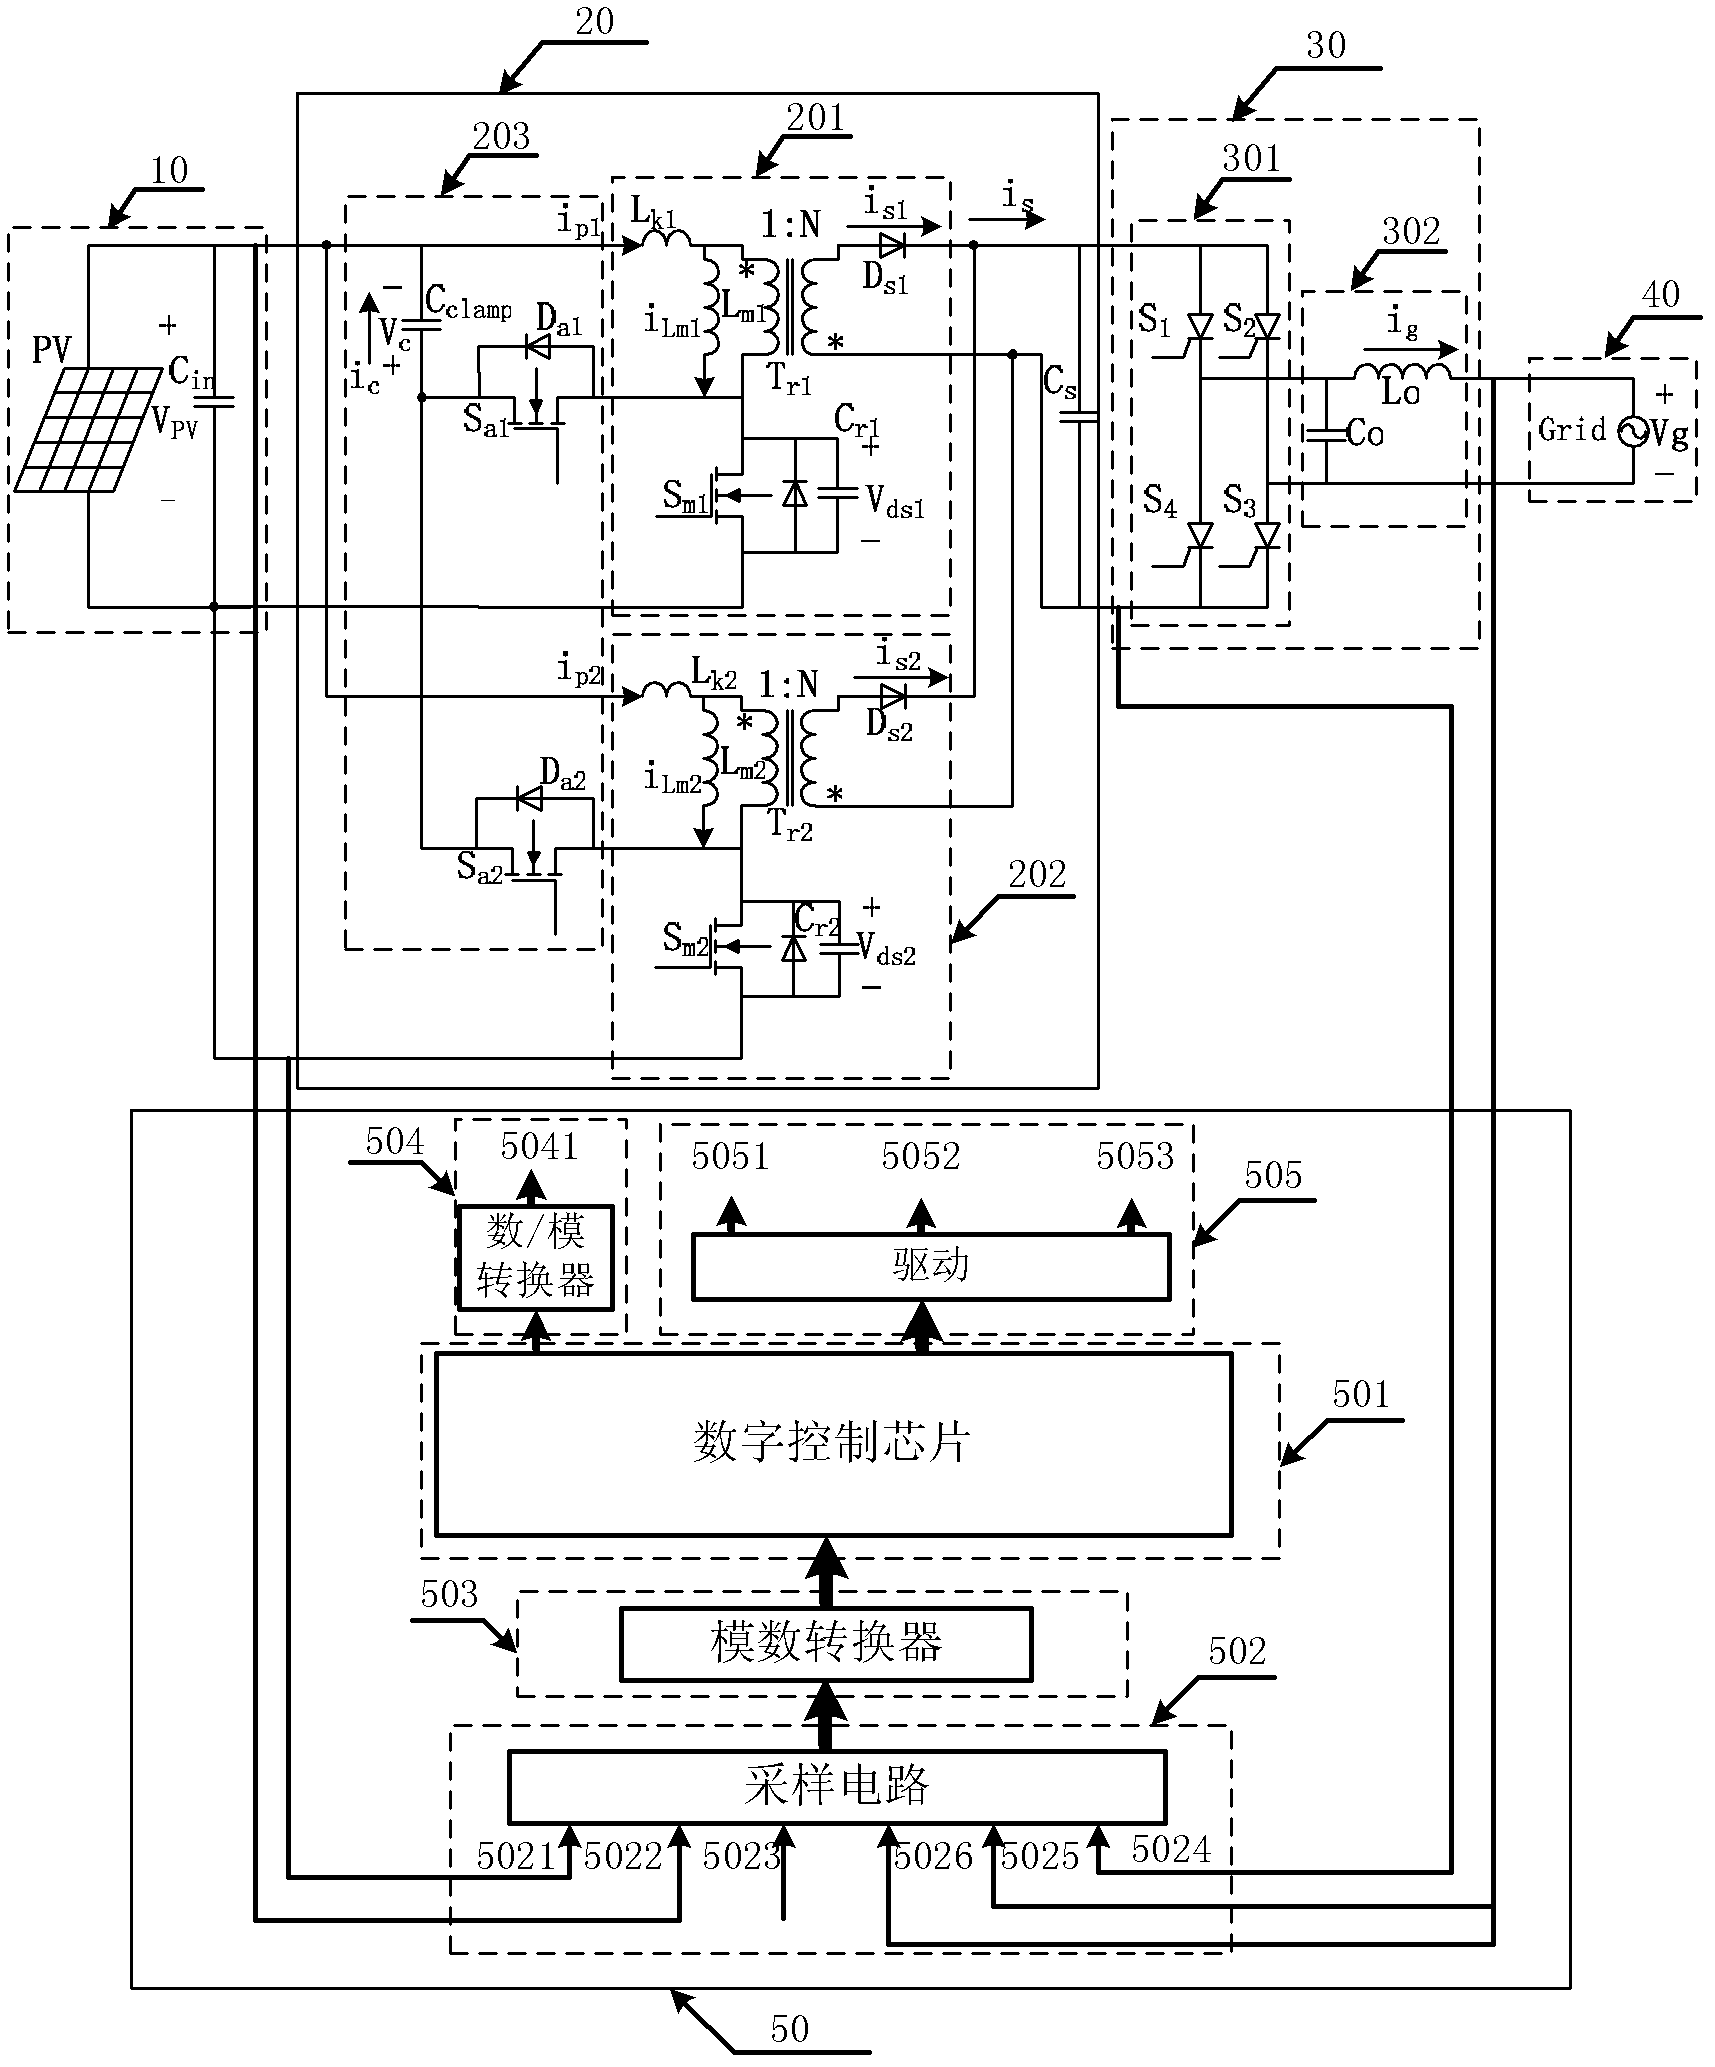 Flyback photovoltaic grid-connected inverter adopting interleaving parallel-connection active clamping technology